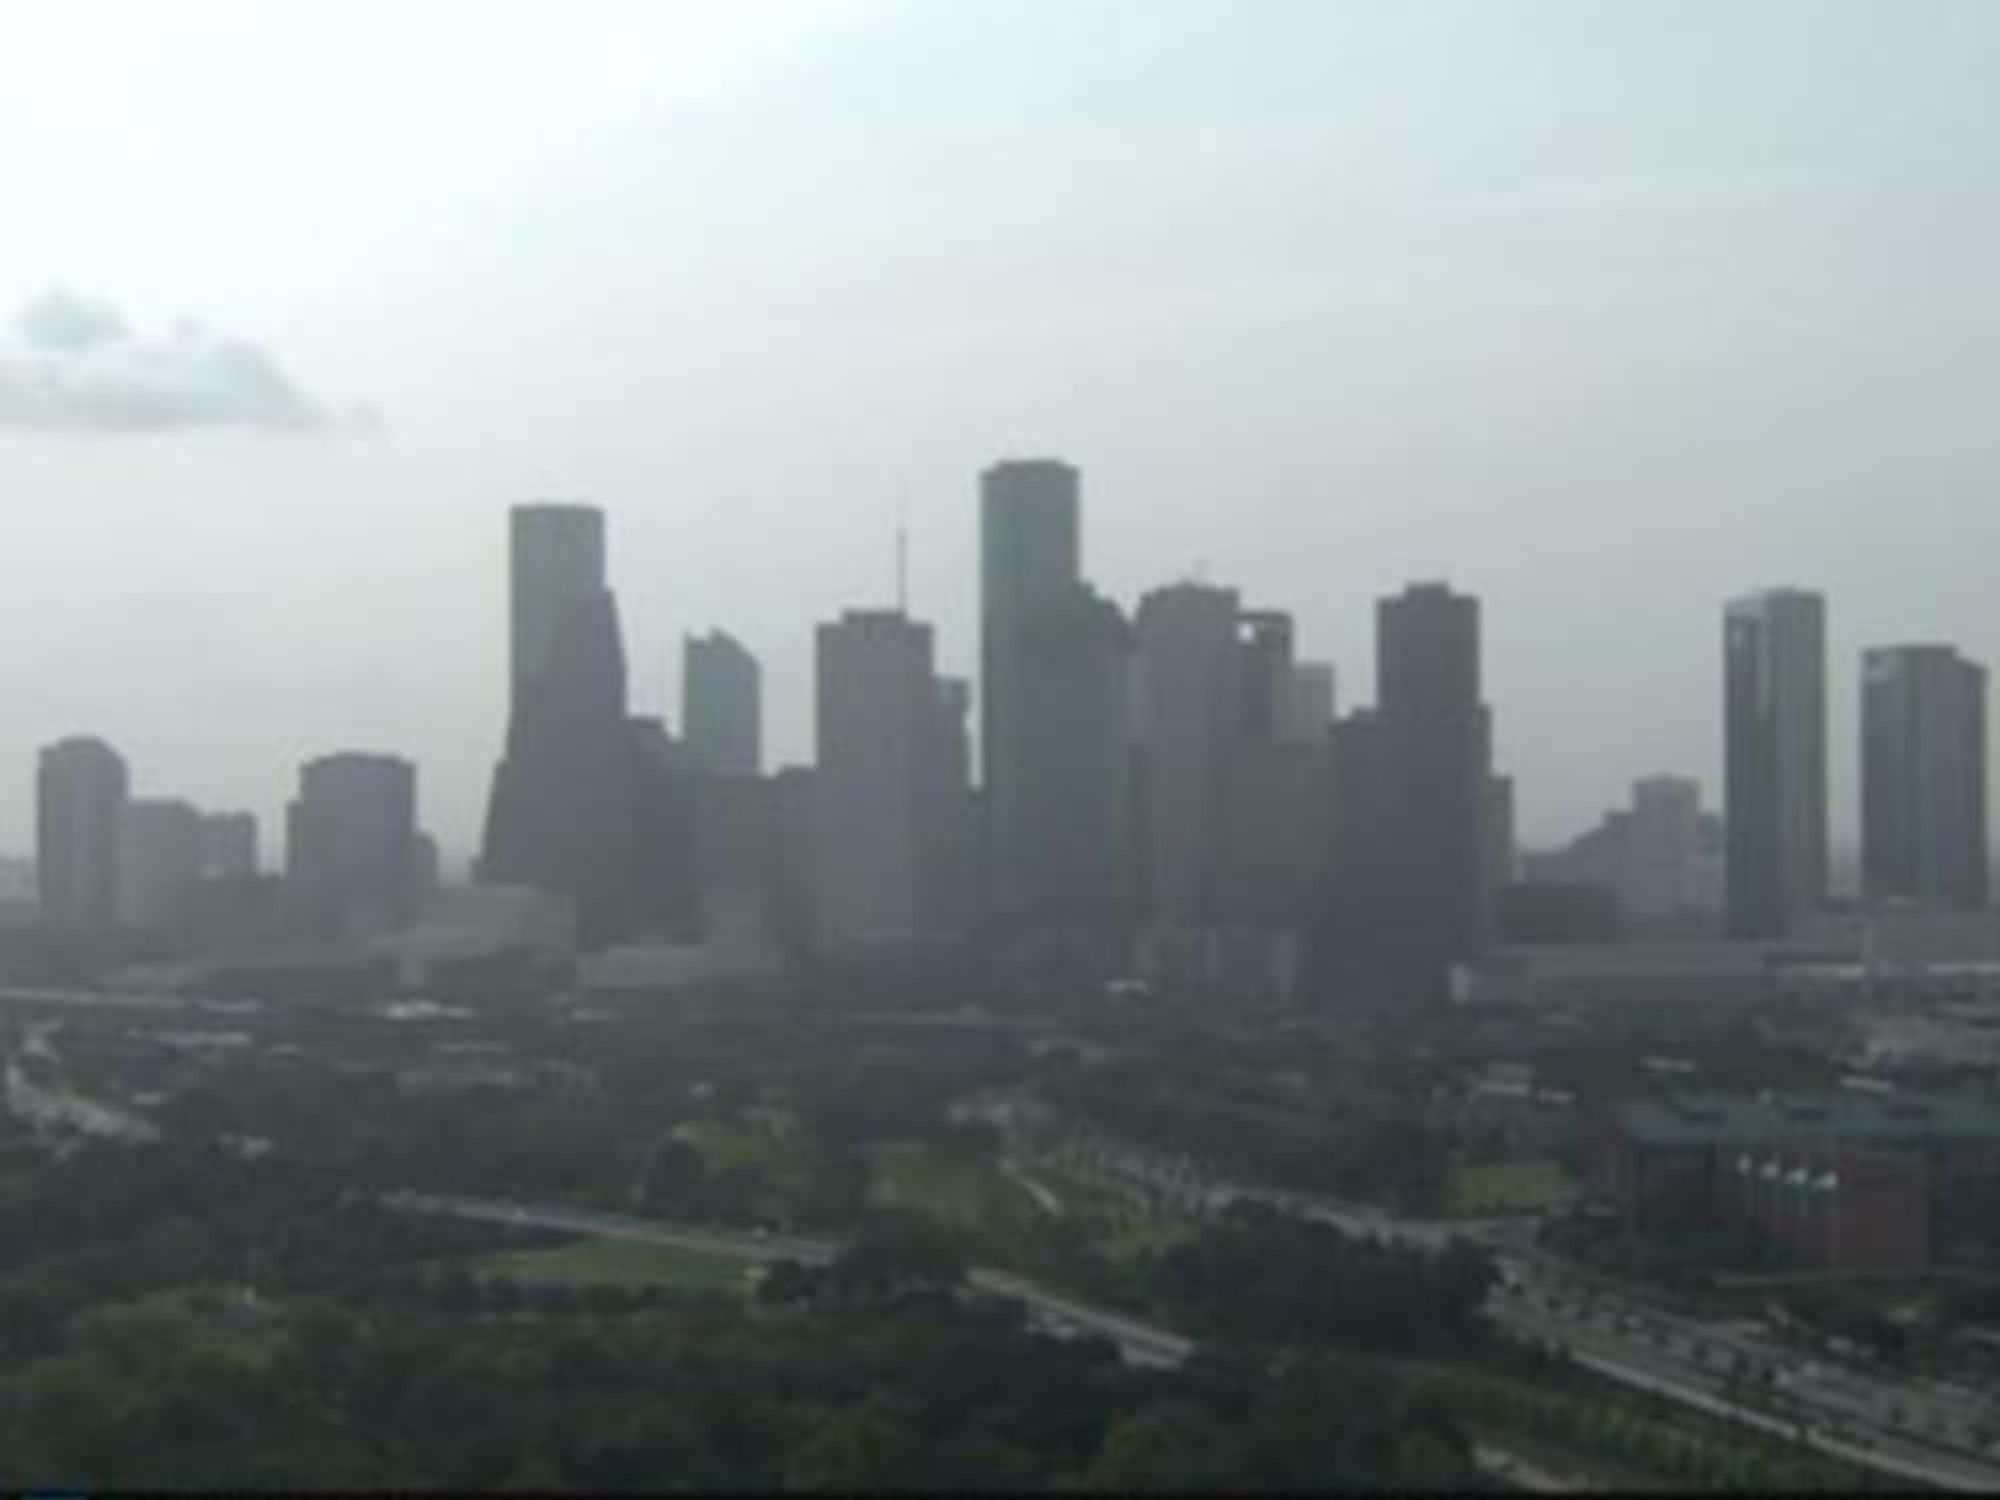 hazy day in Houston due to windstorm from Africa